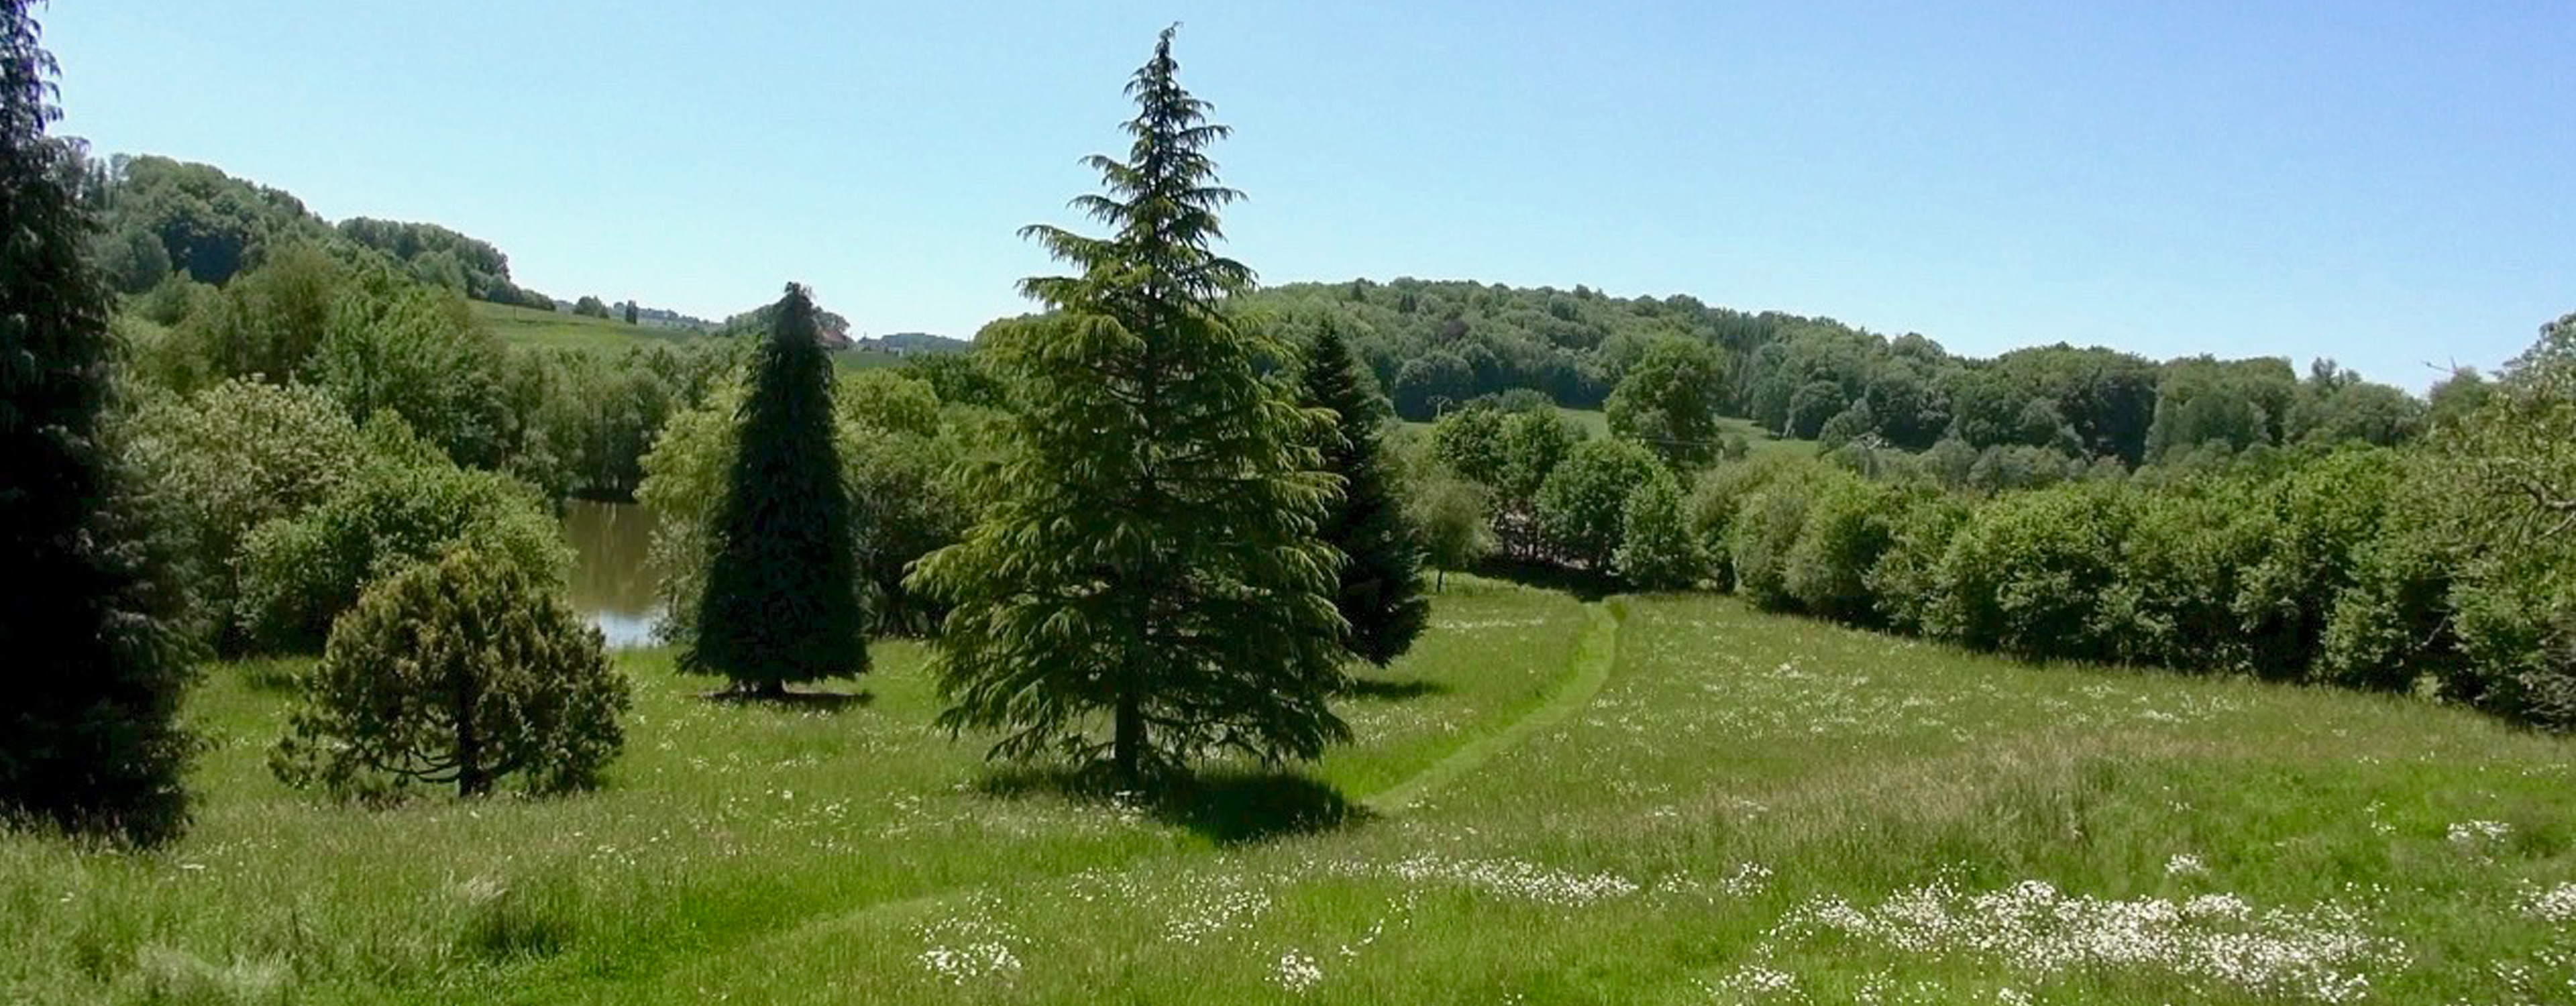 View of cut grass path through wild flower meadow and trees leading to carp fishing lake at Etang de Azat-Chatenet in France